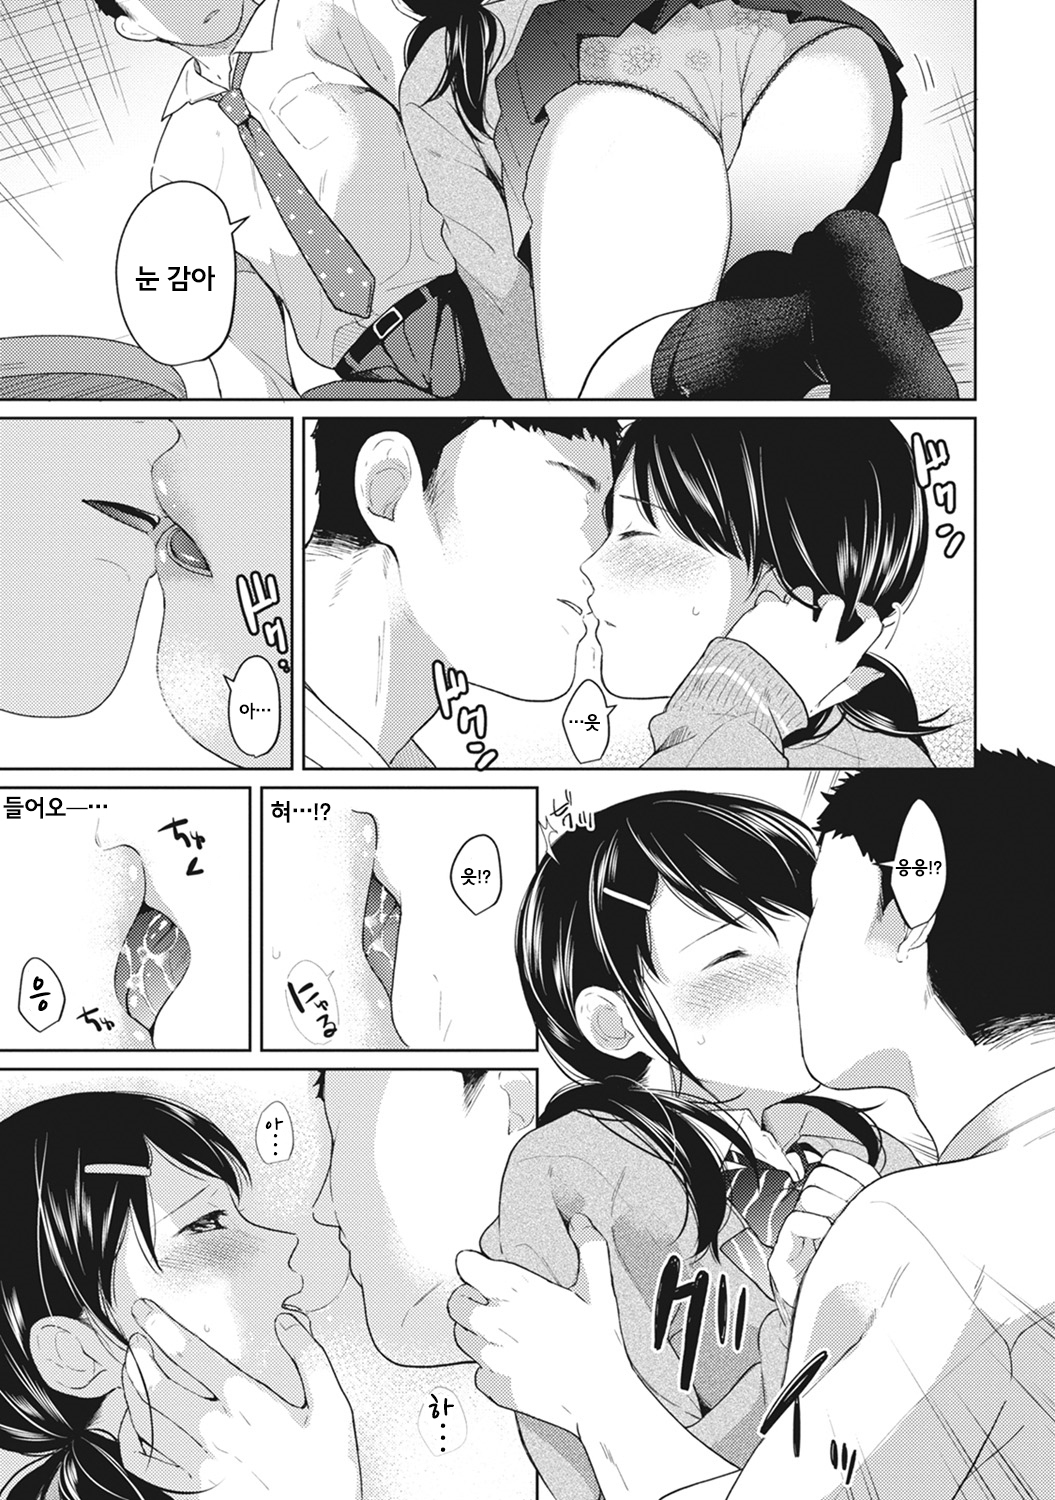 1LDK + JKいきなり道京？みちゃく！？はつエッチ!!？ Ch.5